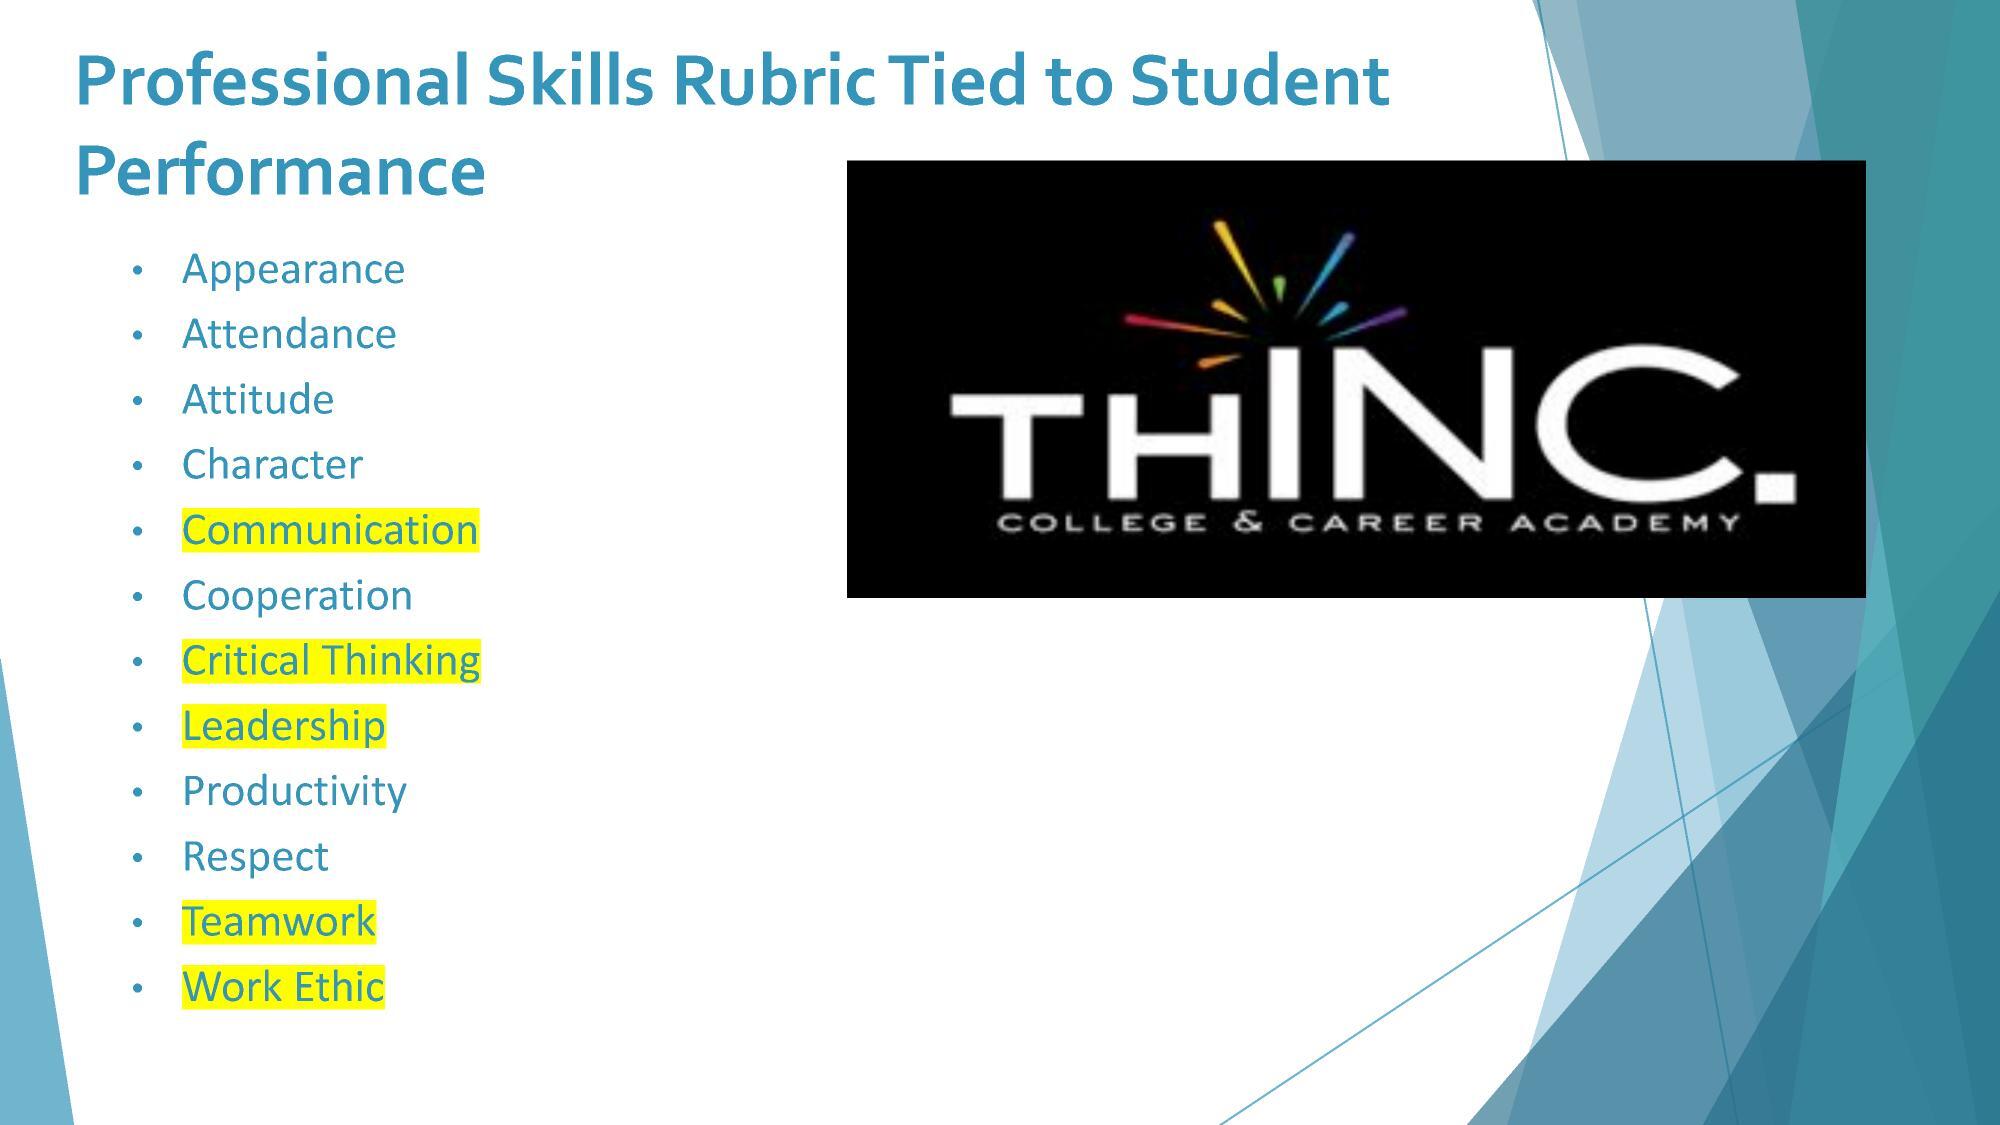 Professional Skills Rubric Tied to Student Performance